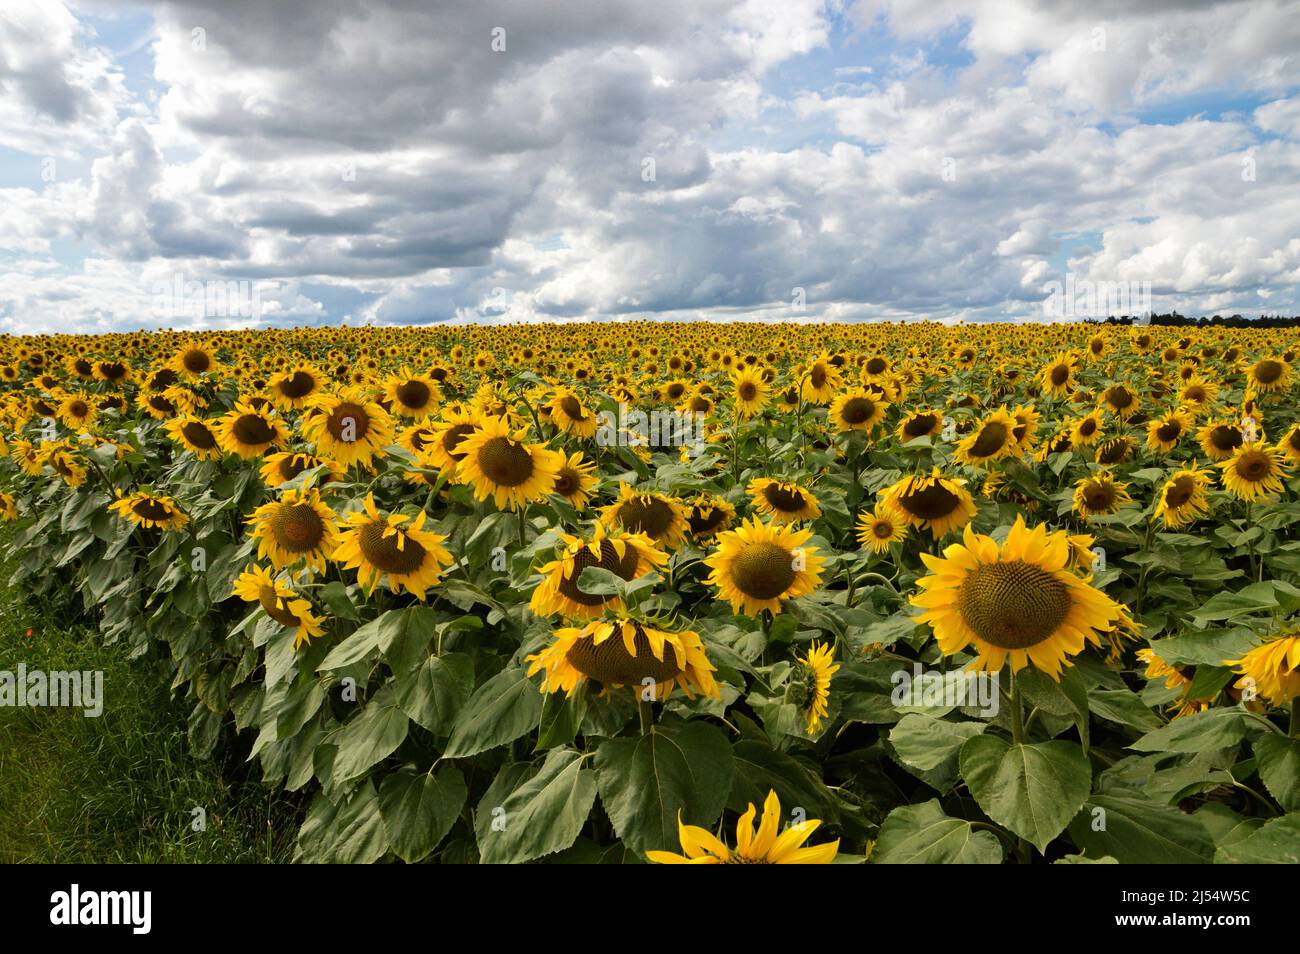 A beautiful sunflower field for making sunflower oil or biofuel. Stock Photo